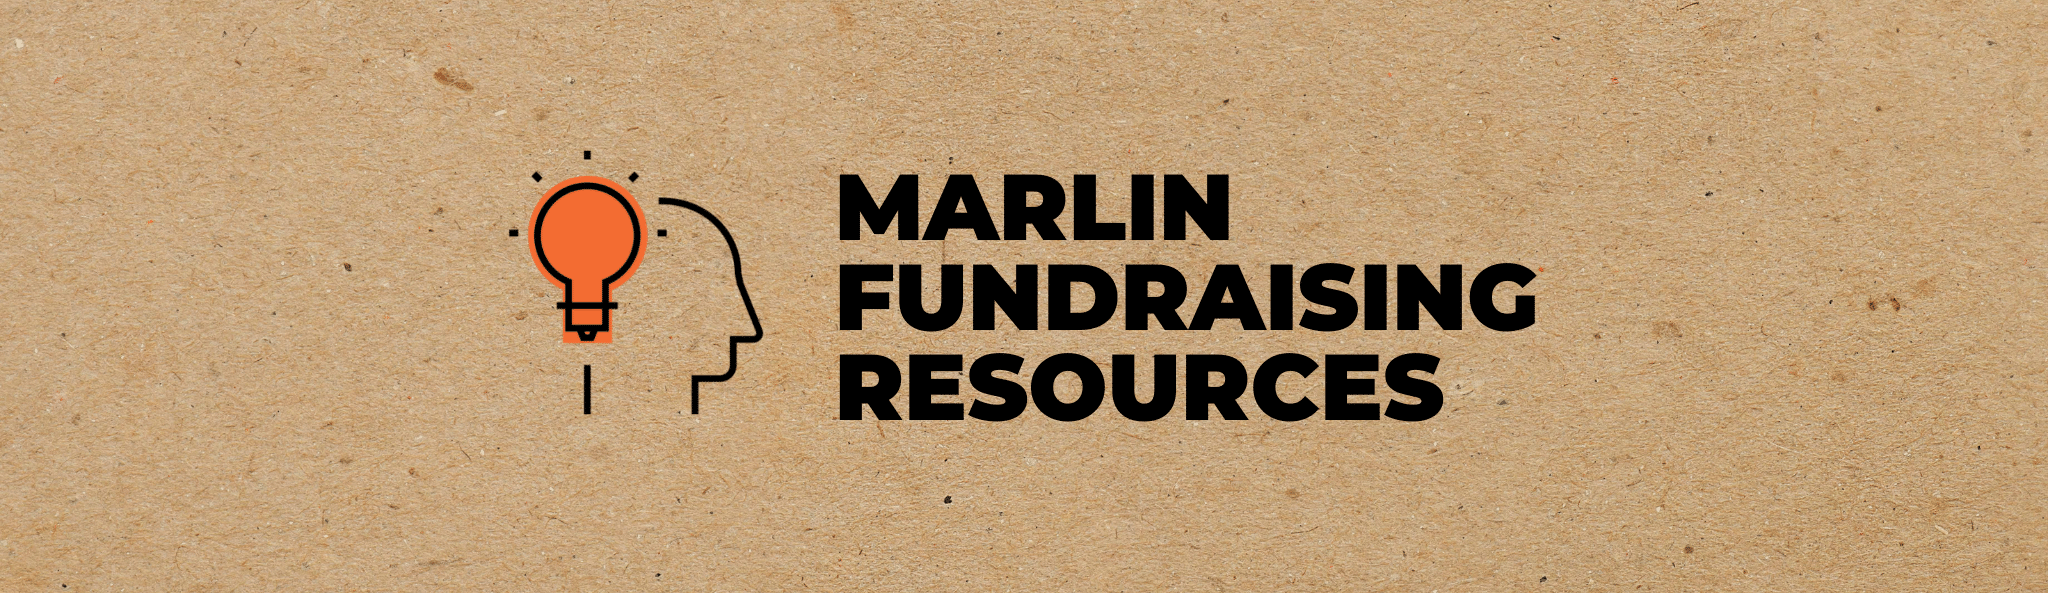 Marlin Fundraising Resources